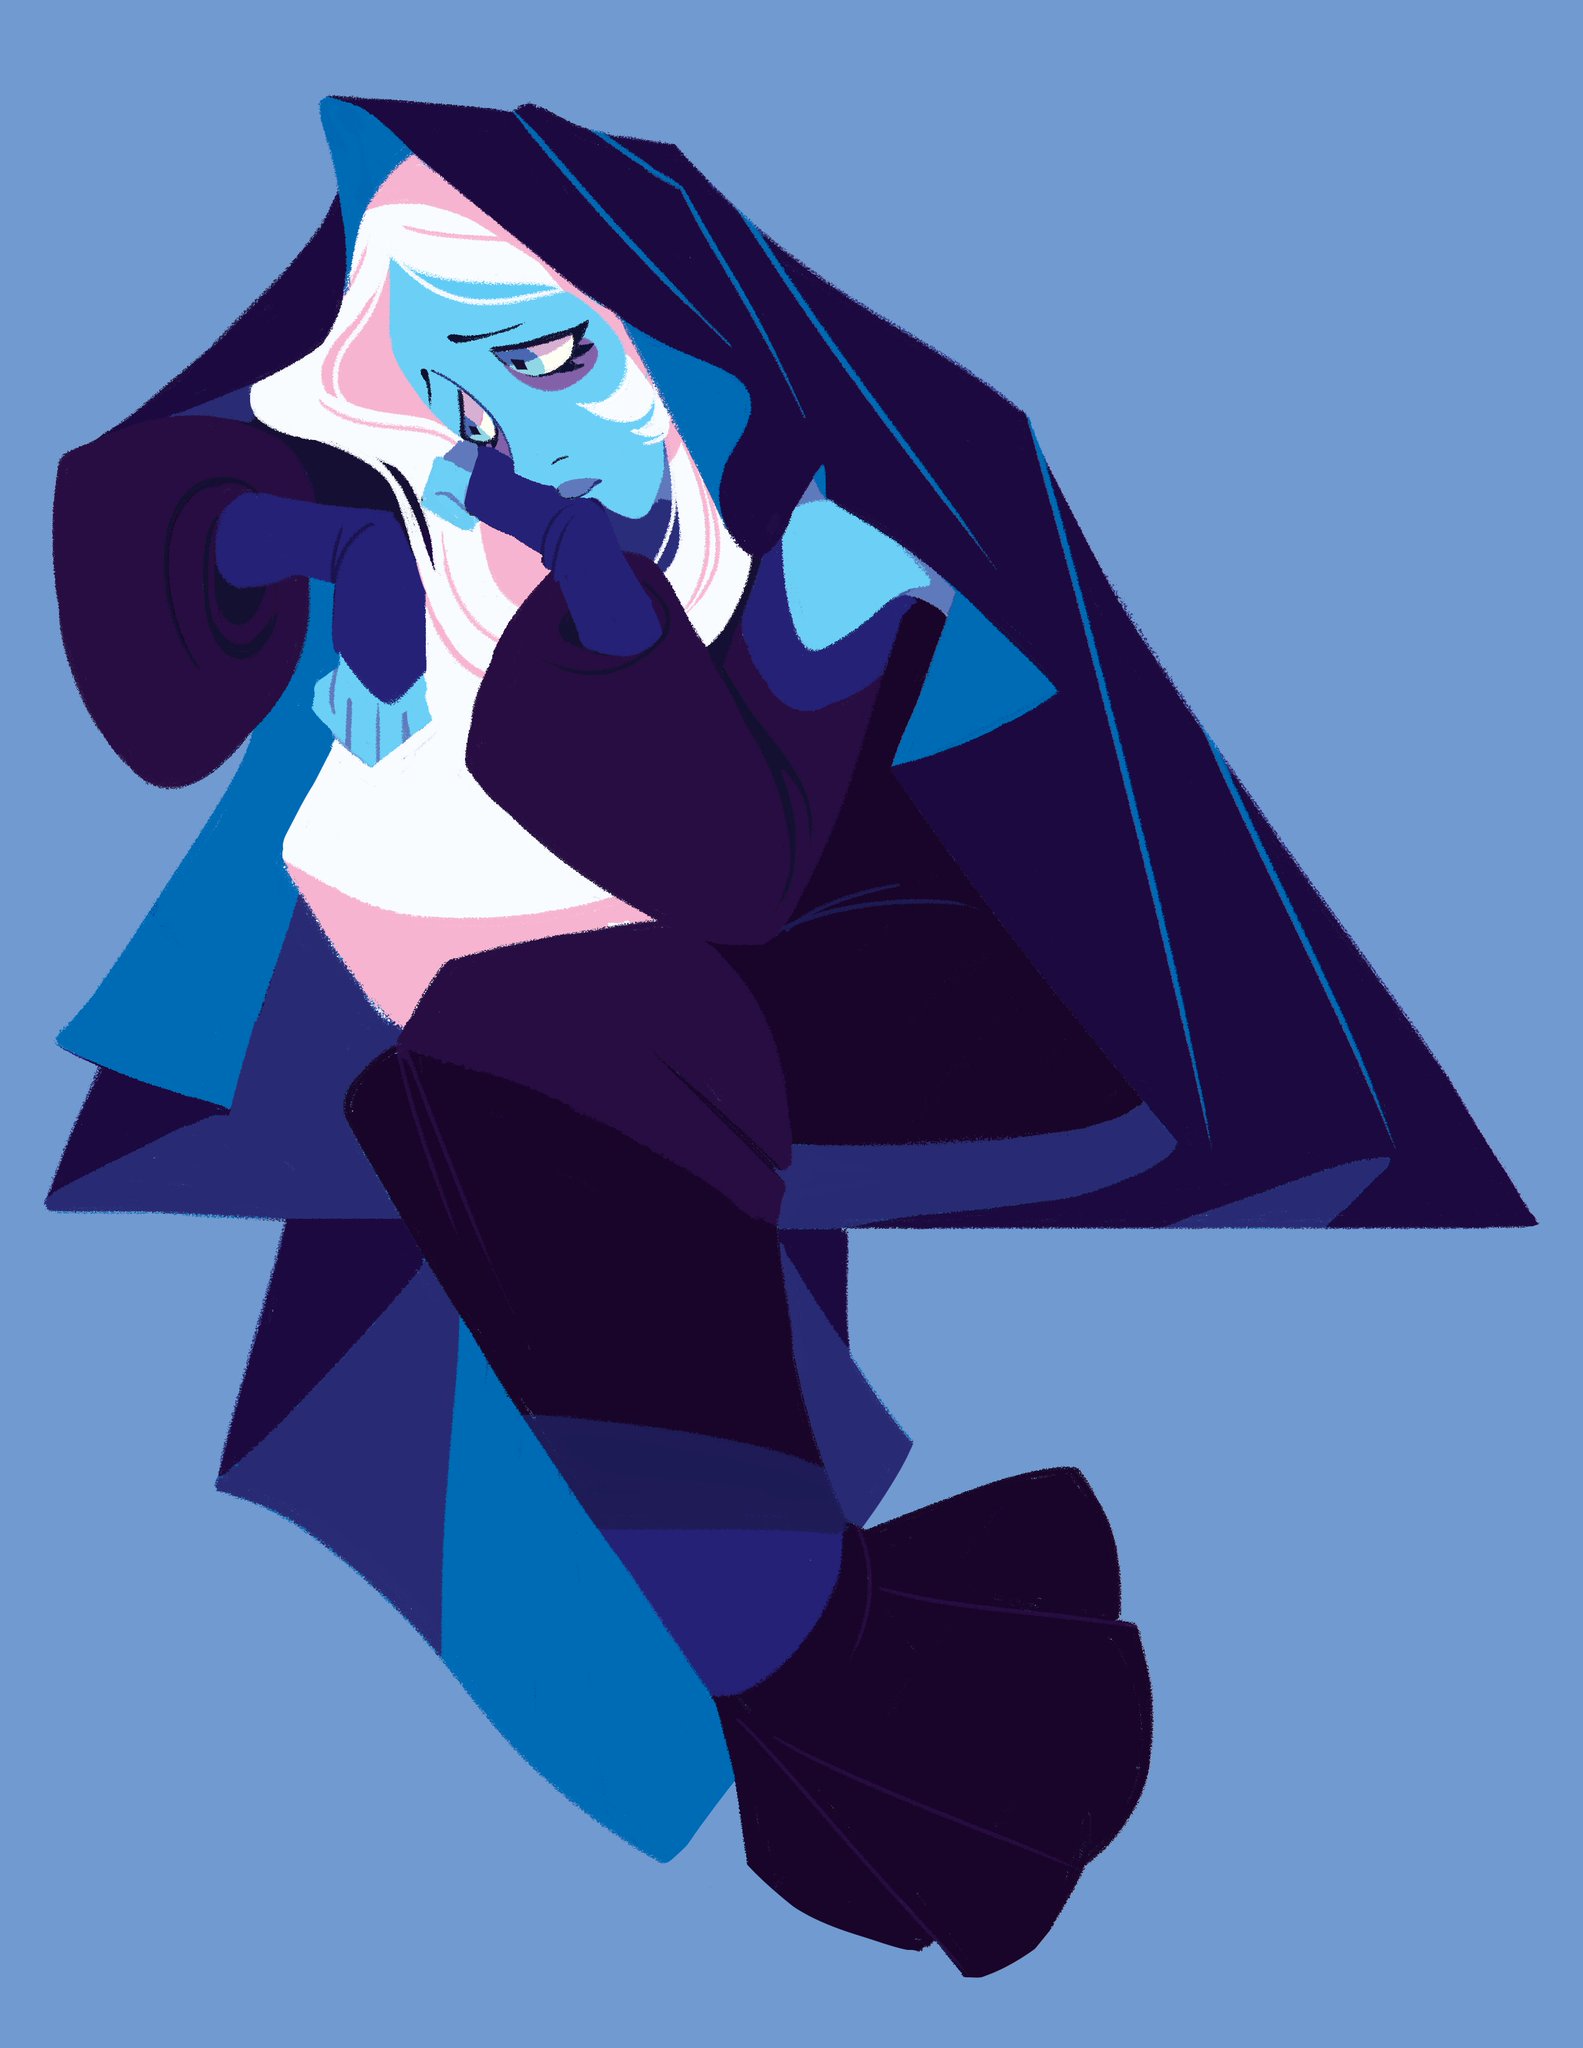 “Now that the episodes are coming out, I felt like I could finally work on this print. I really love Blue Diamond <3 She intrigues me”